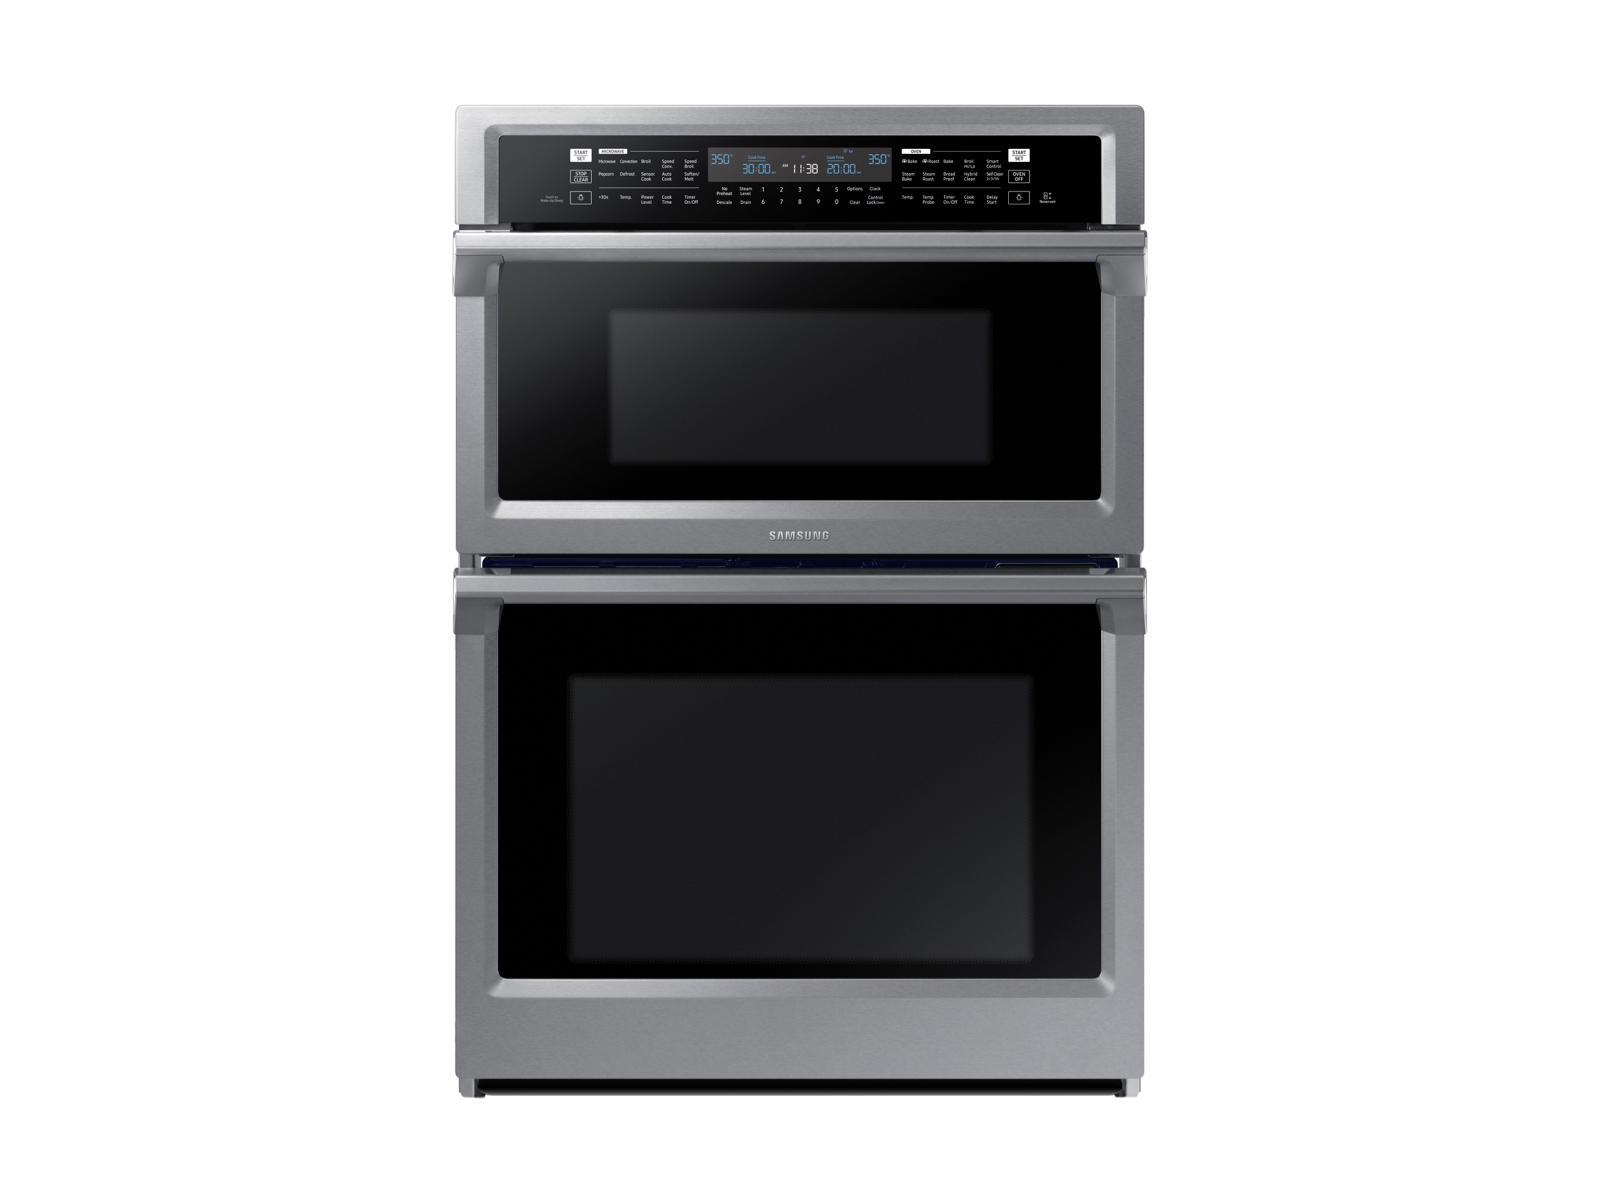 https://image-us.samsung.com/SamsungUS/home/home-appliances/wall-ovens/microwave-combination-oven/pdp/nq70m6650ds-aa/updated_1st_gallery_image_072419/NQ70M6650DSAA.jpg?$product-details-jpg$